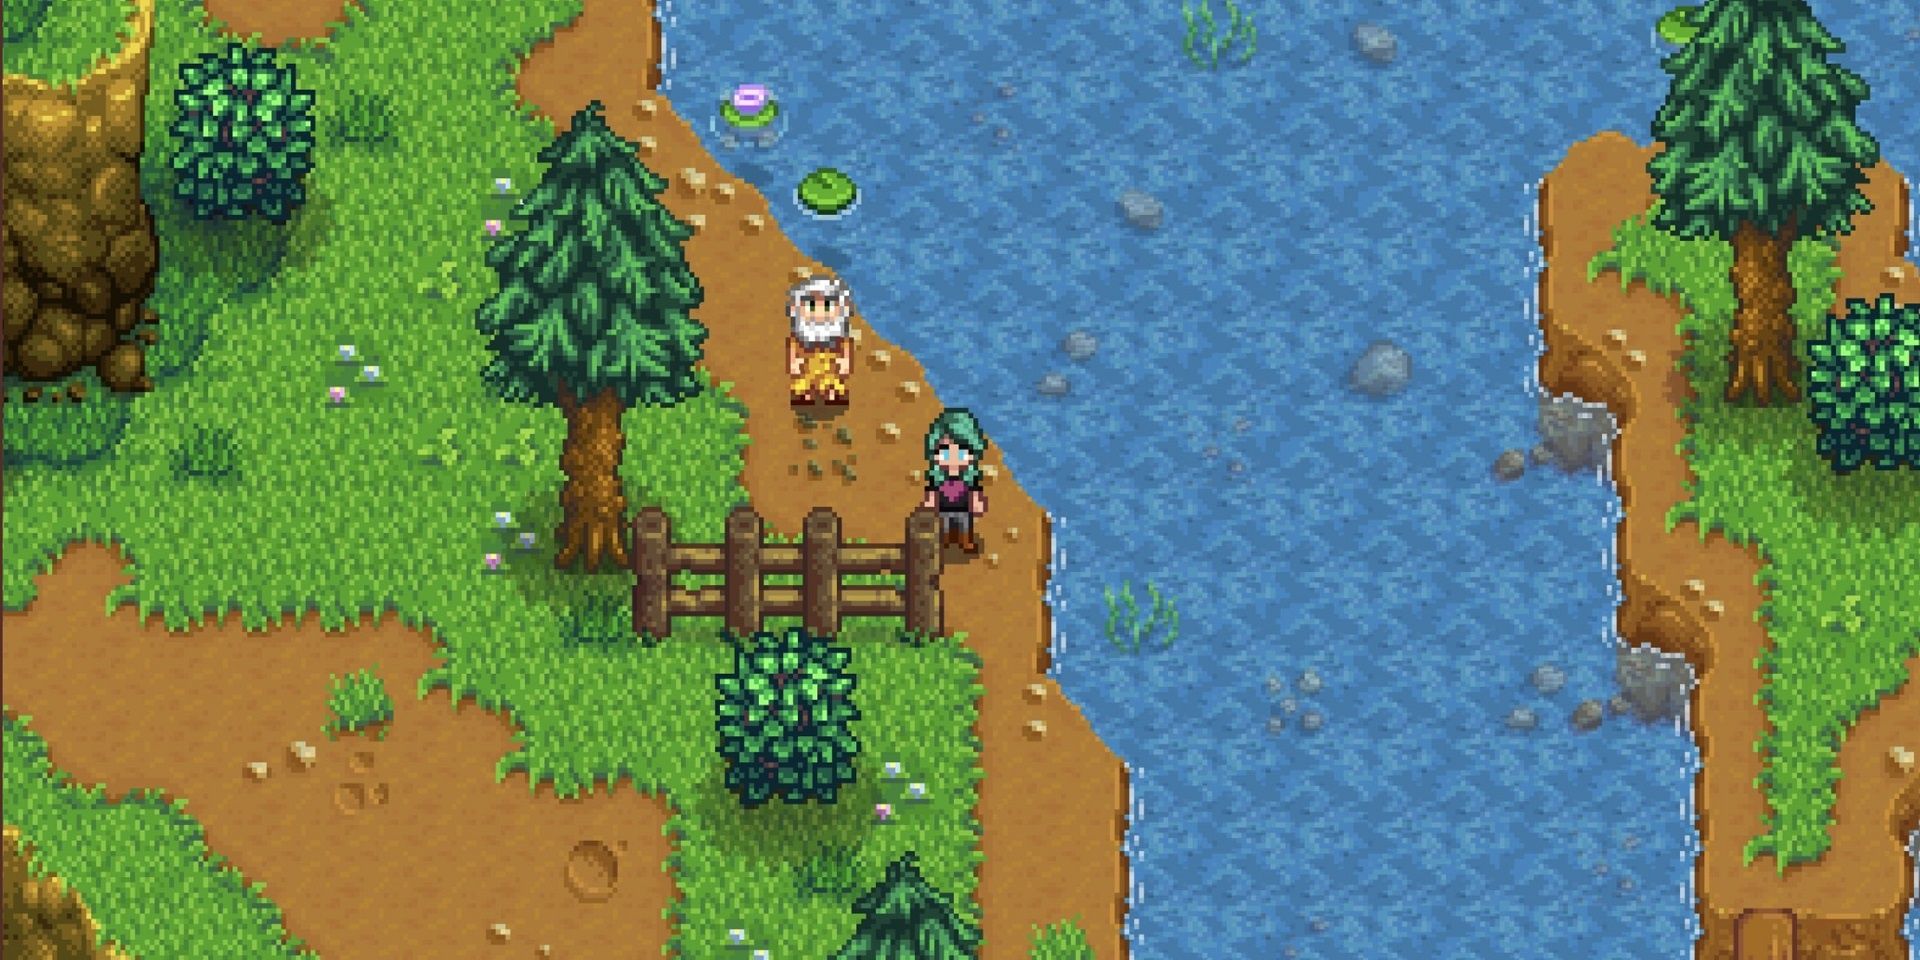 Linus standing by the river in Stardew Valley